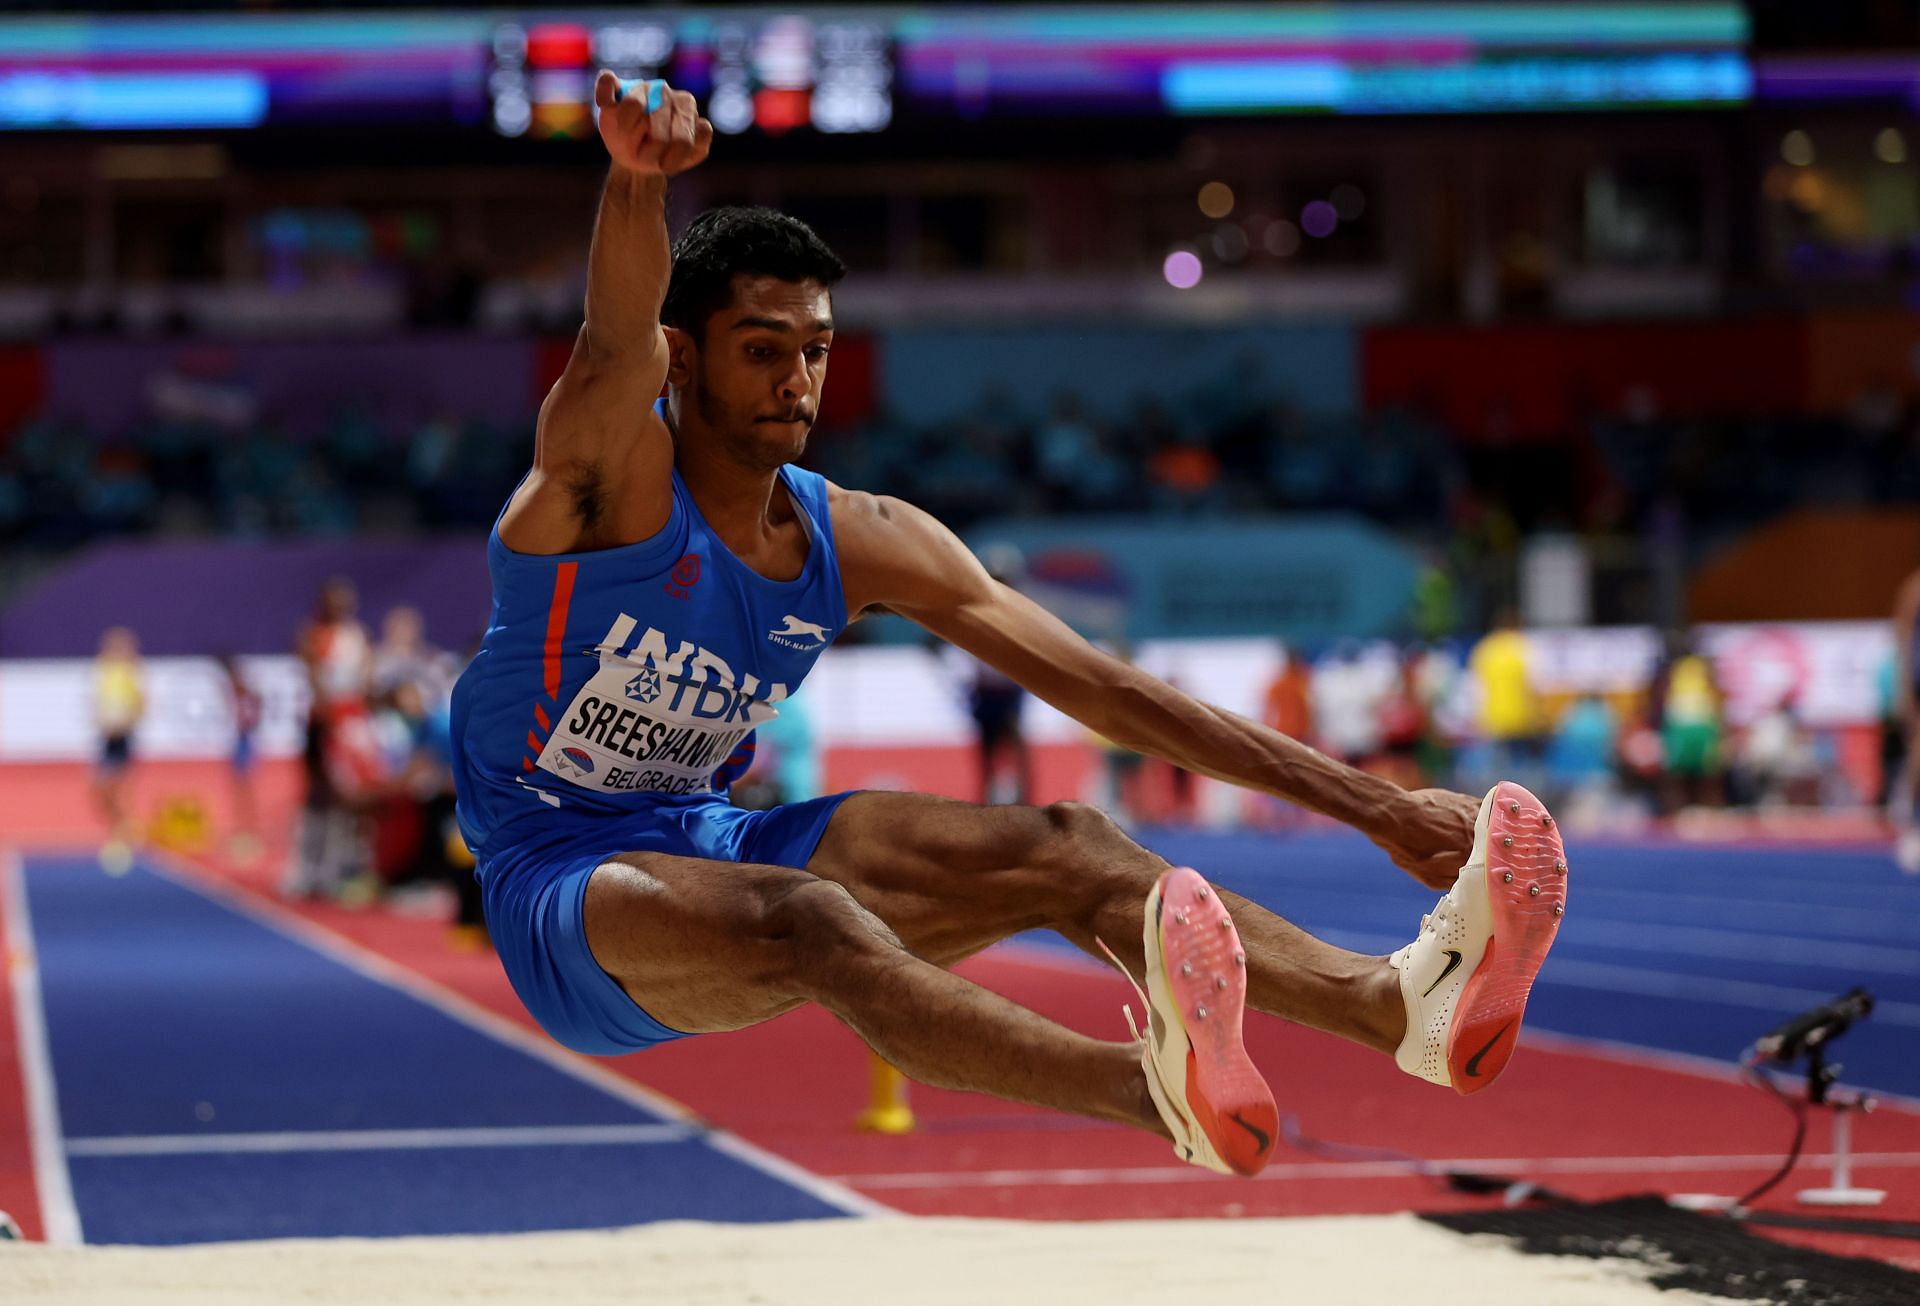 Murali Sreeshankar erased the meet record in the preliminary round of the long jump event at the National Interstate Athletics Championships